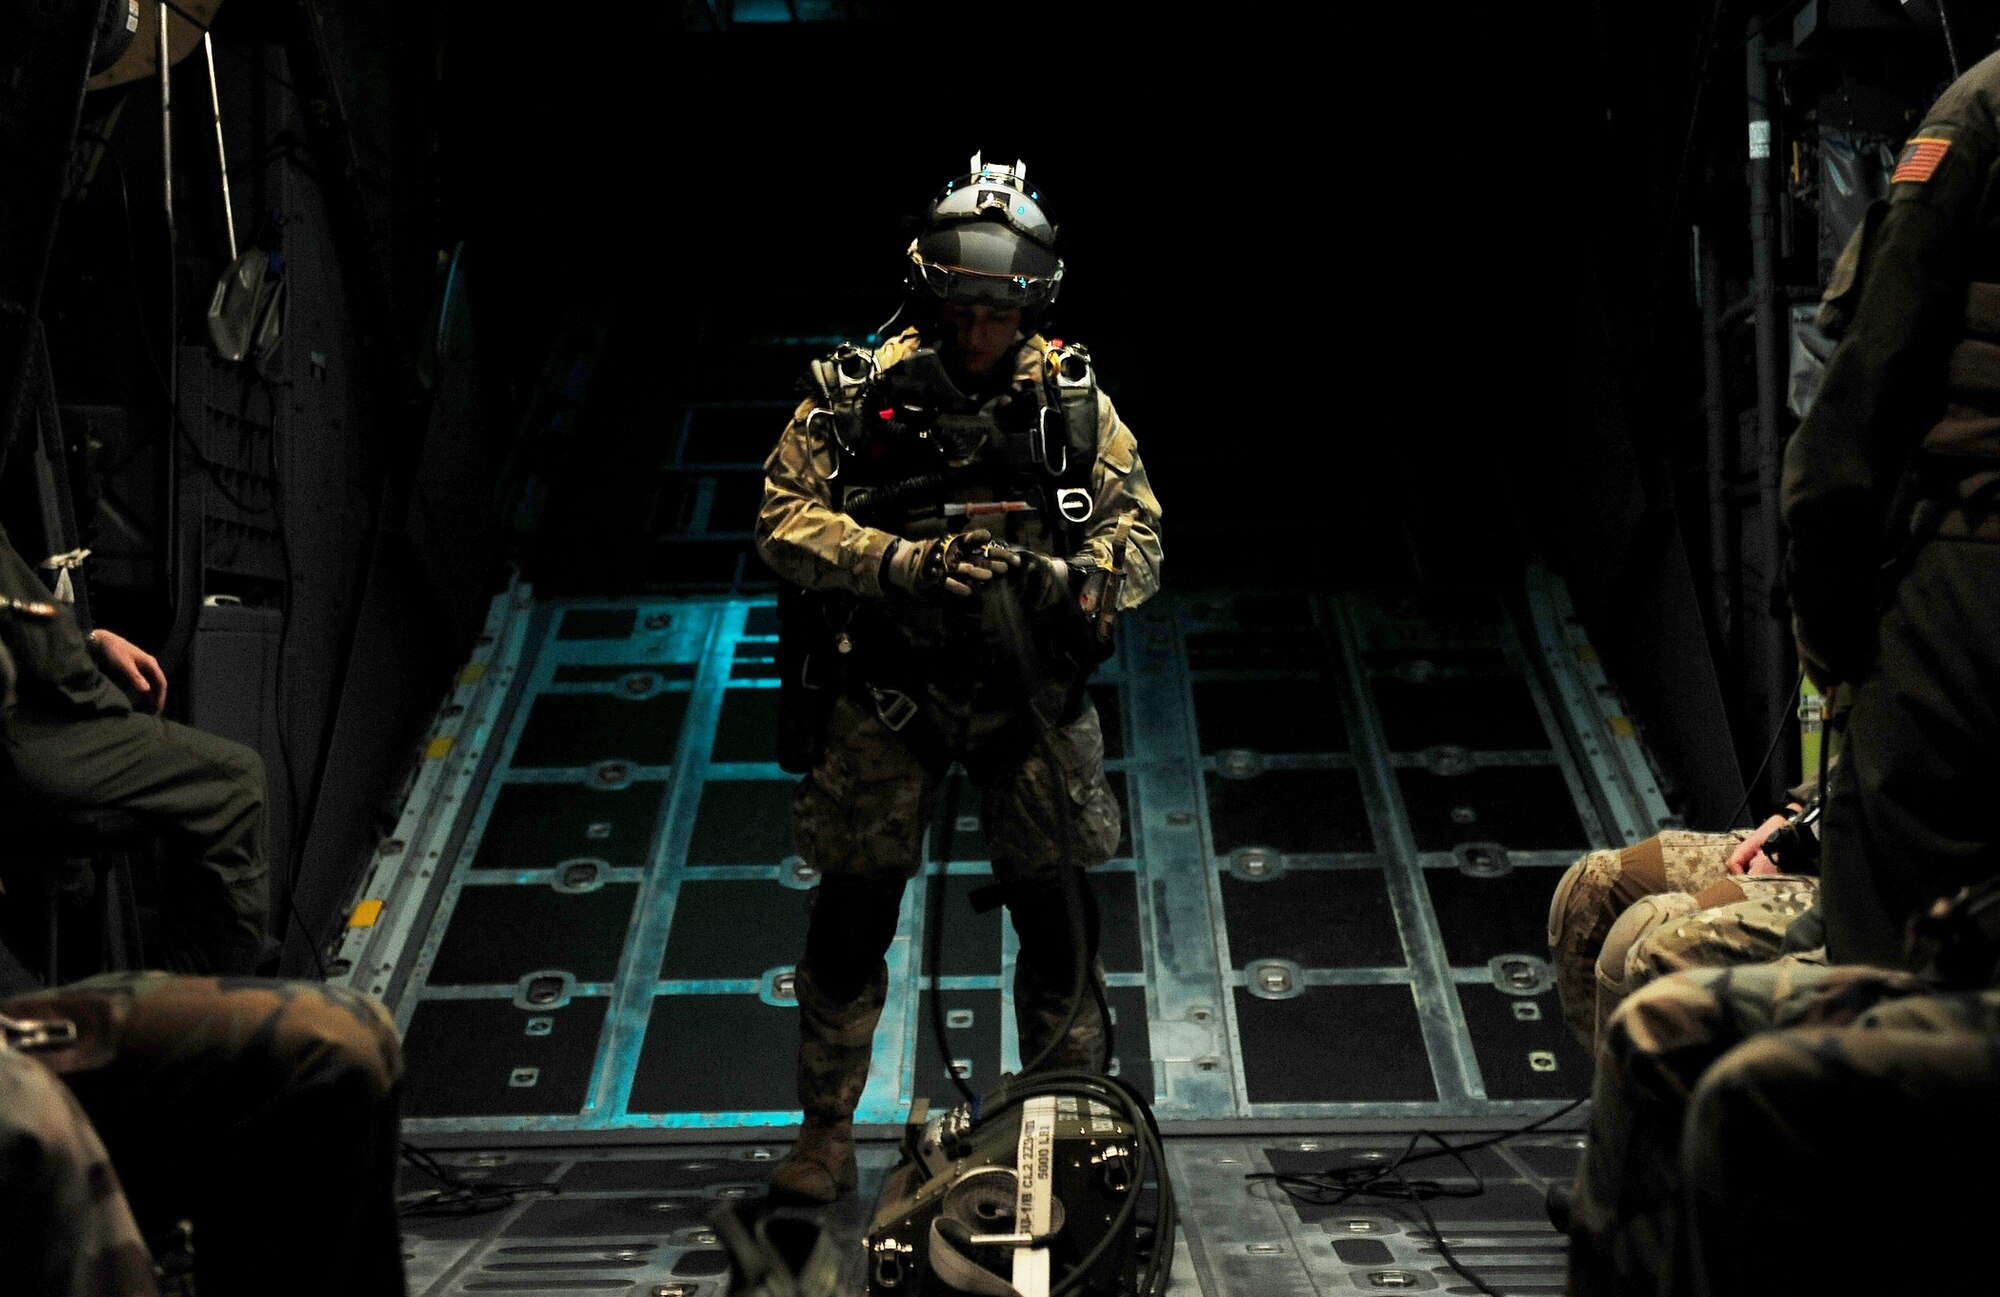 Airmen of the U.S. Air Force Special Tactics Training Squadron prepare to conduct a high altitude, low opening or HALO, mission near Fort Walton Beach, Fla., March 16, 2010, during Exercise Emerald Warrior 2010. U.S. military servicemembers participated in the U.S. Special Operations Command-sponsored, 19-day joint training exercise at multiple sites along Florida's Gulf Coast. (U.S. Air Force photo/Staff Sgt. Clay Lancaster)